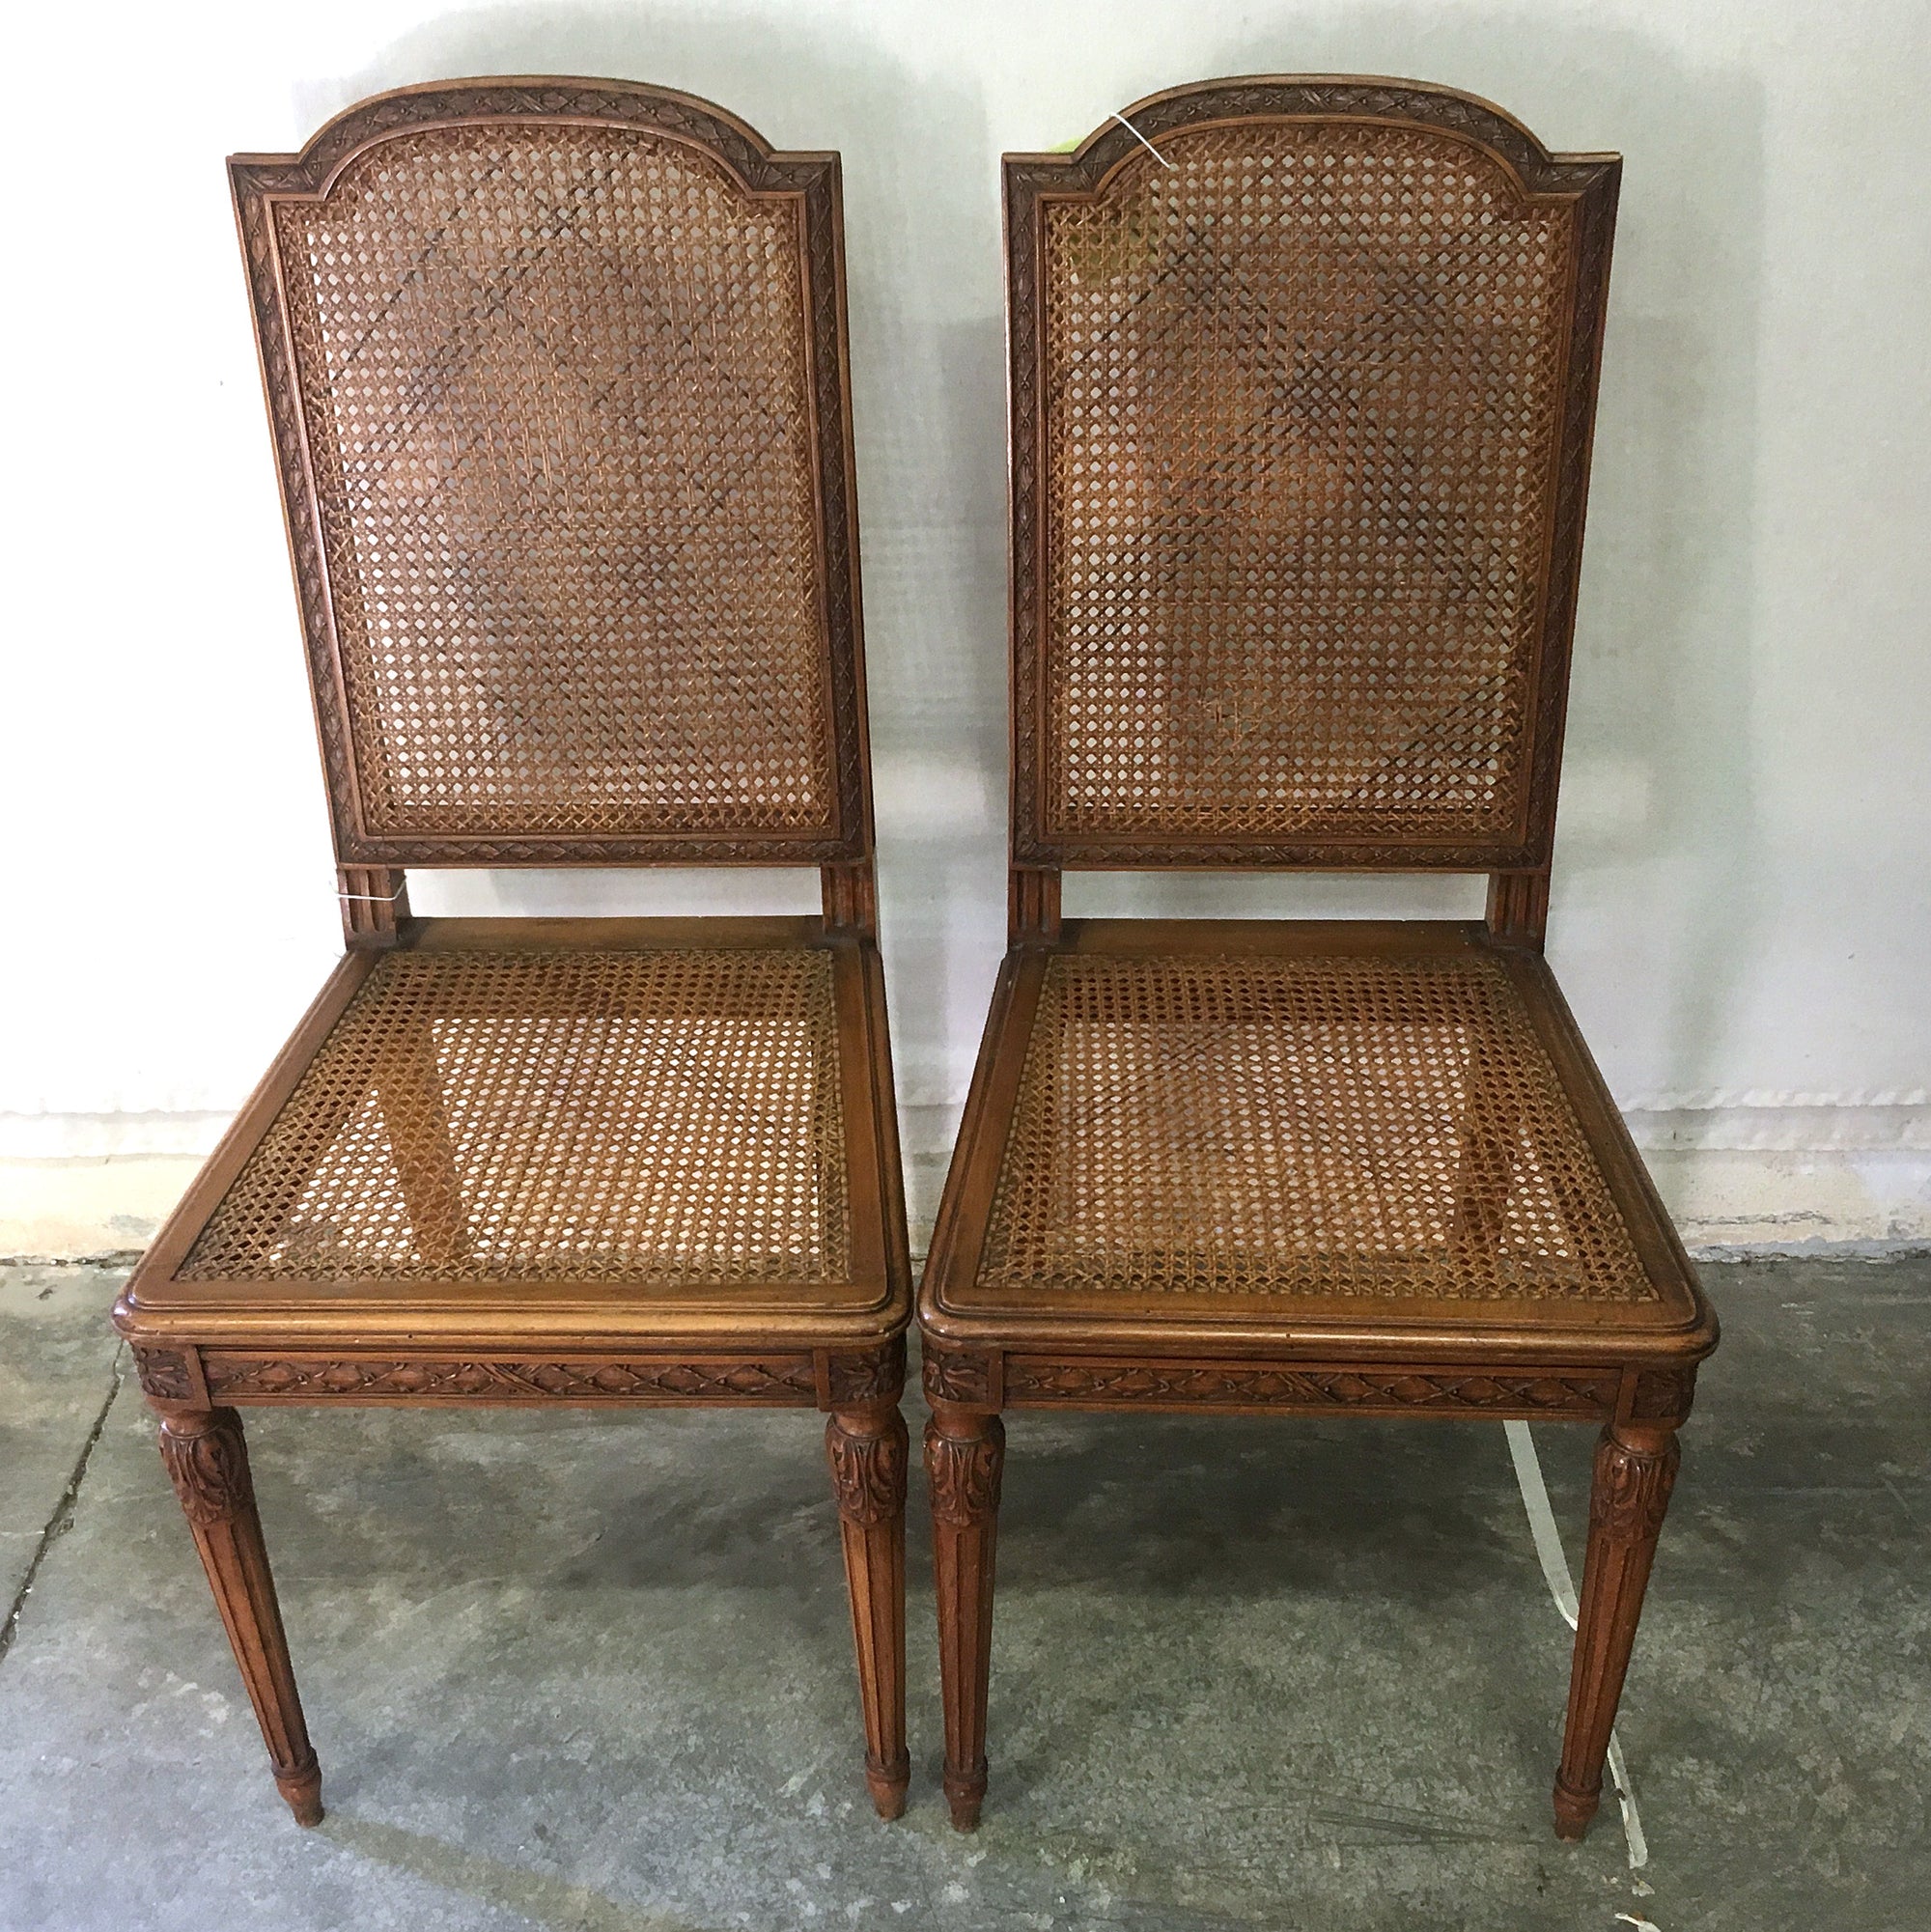 Antique French Cane Chairs with Matching Splat, Pair